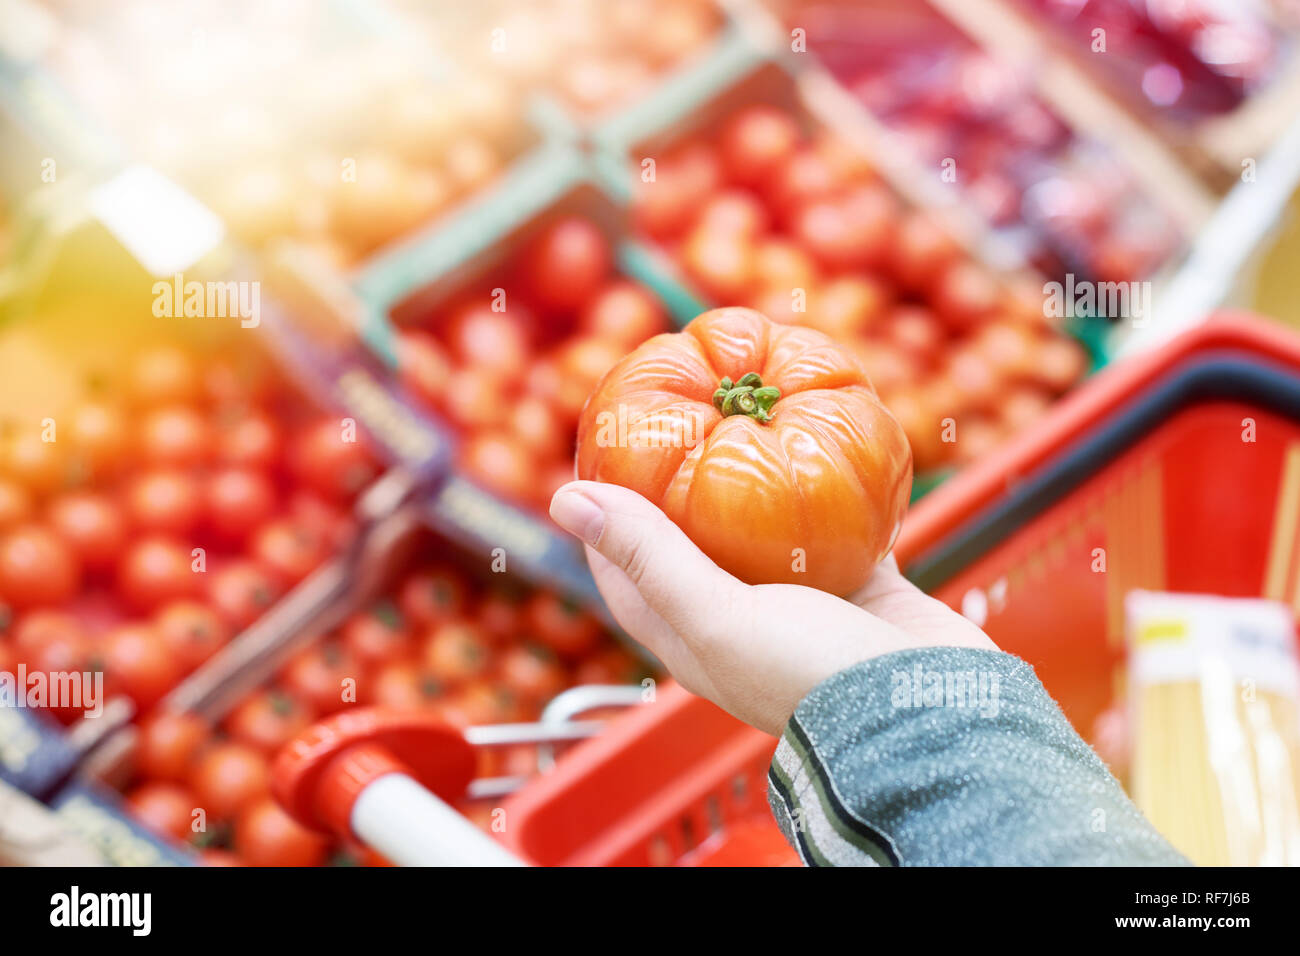 Tomato in the hand of the buyer at the grocery store Stock Photo